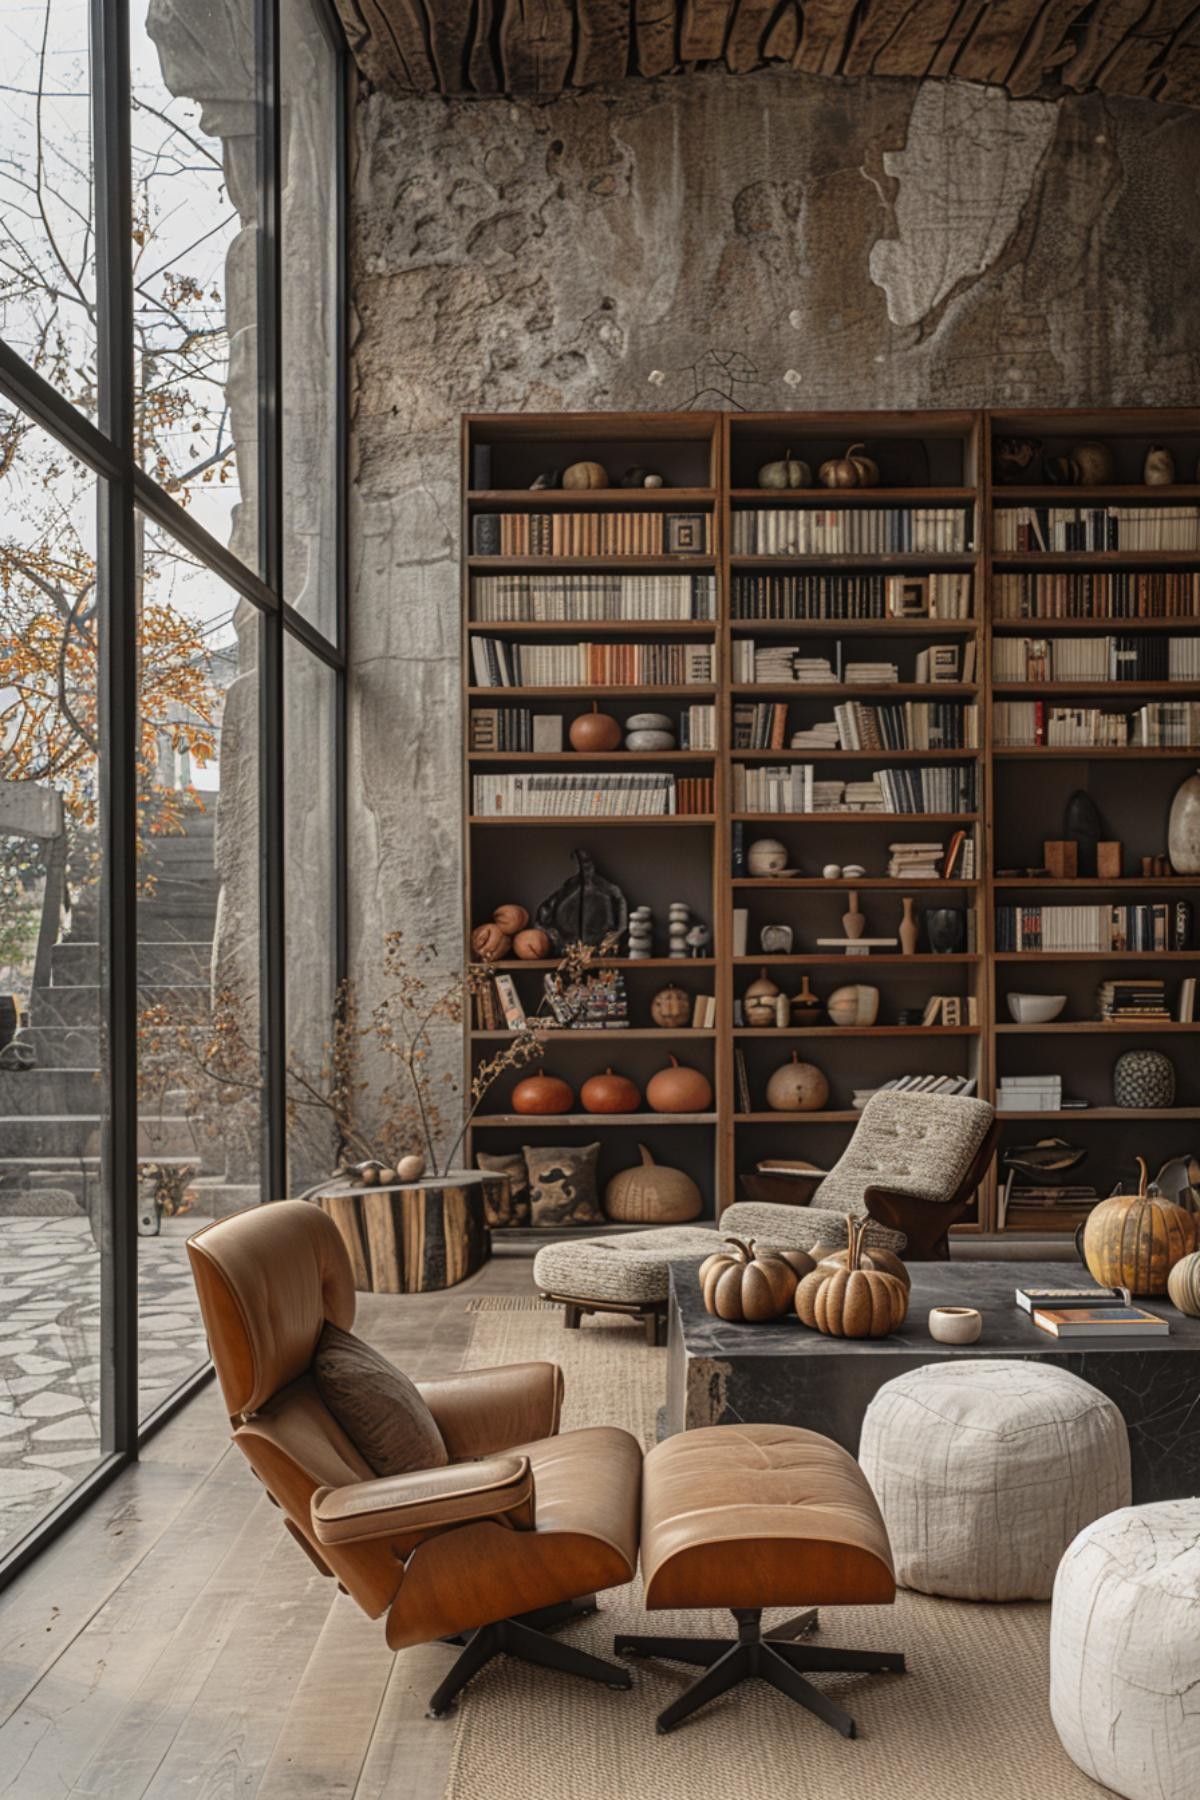 Stone and Shelves